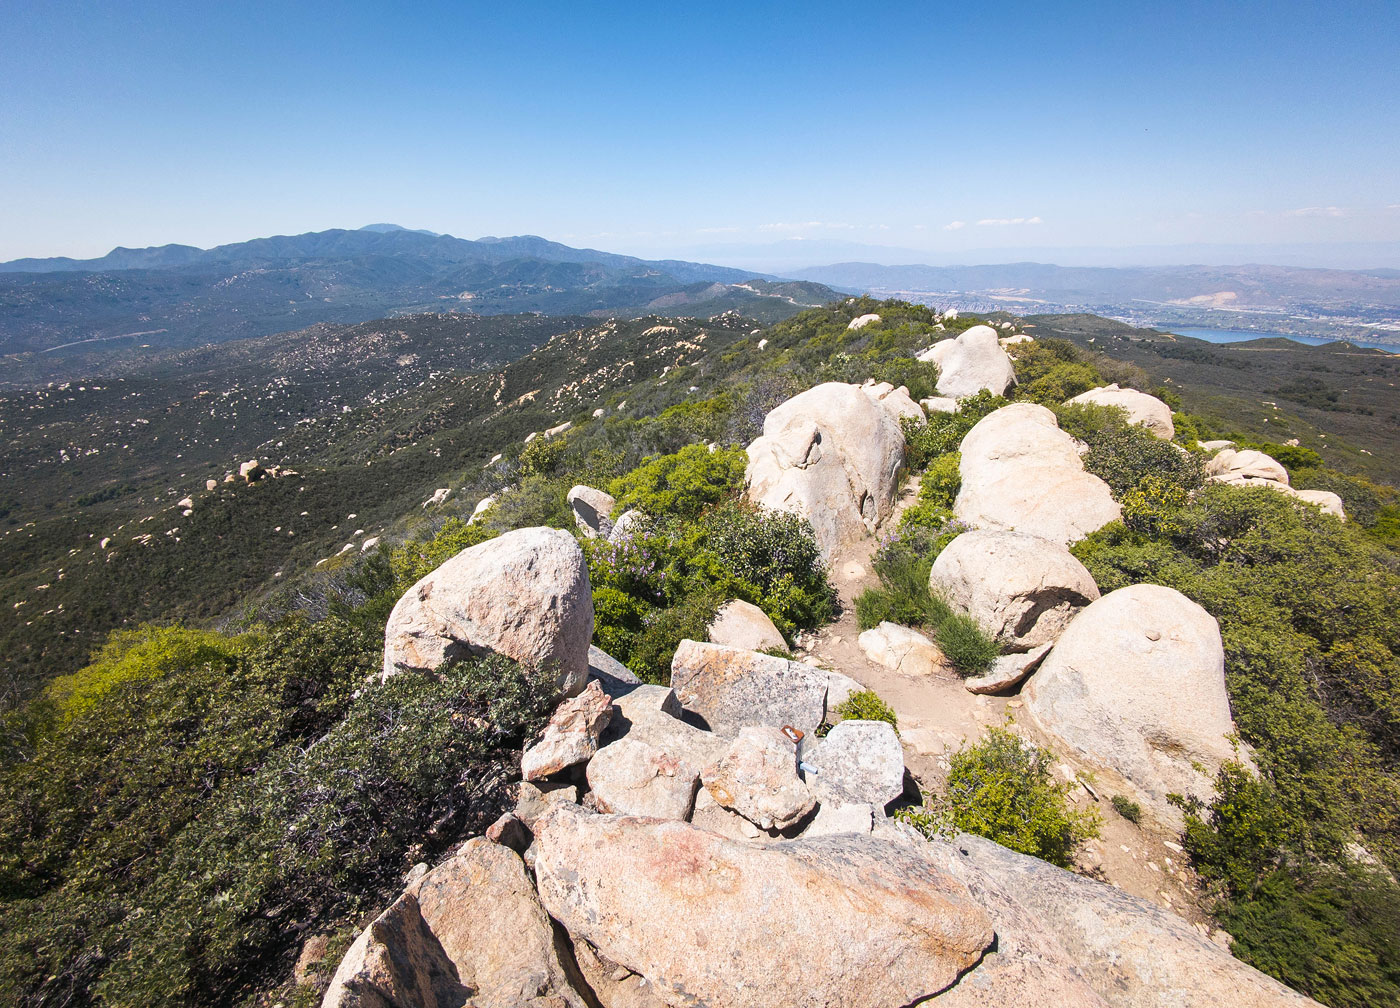 Hike San Mateo Peak via Morgan Trail in Cleveland National Forest, California - Stav is Lost